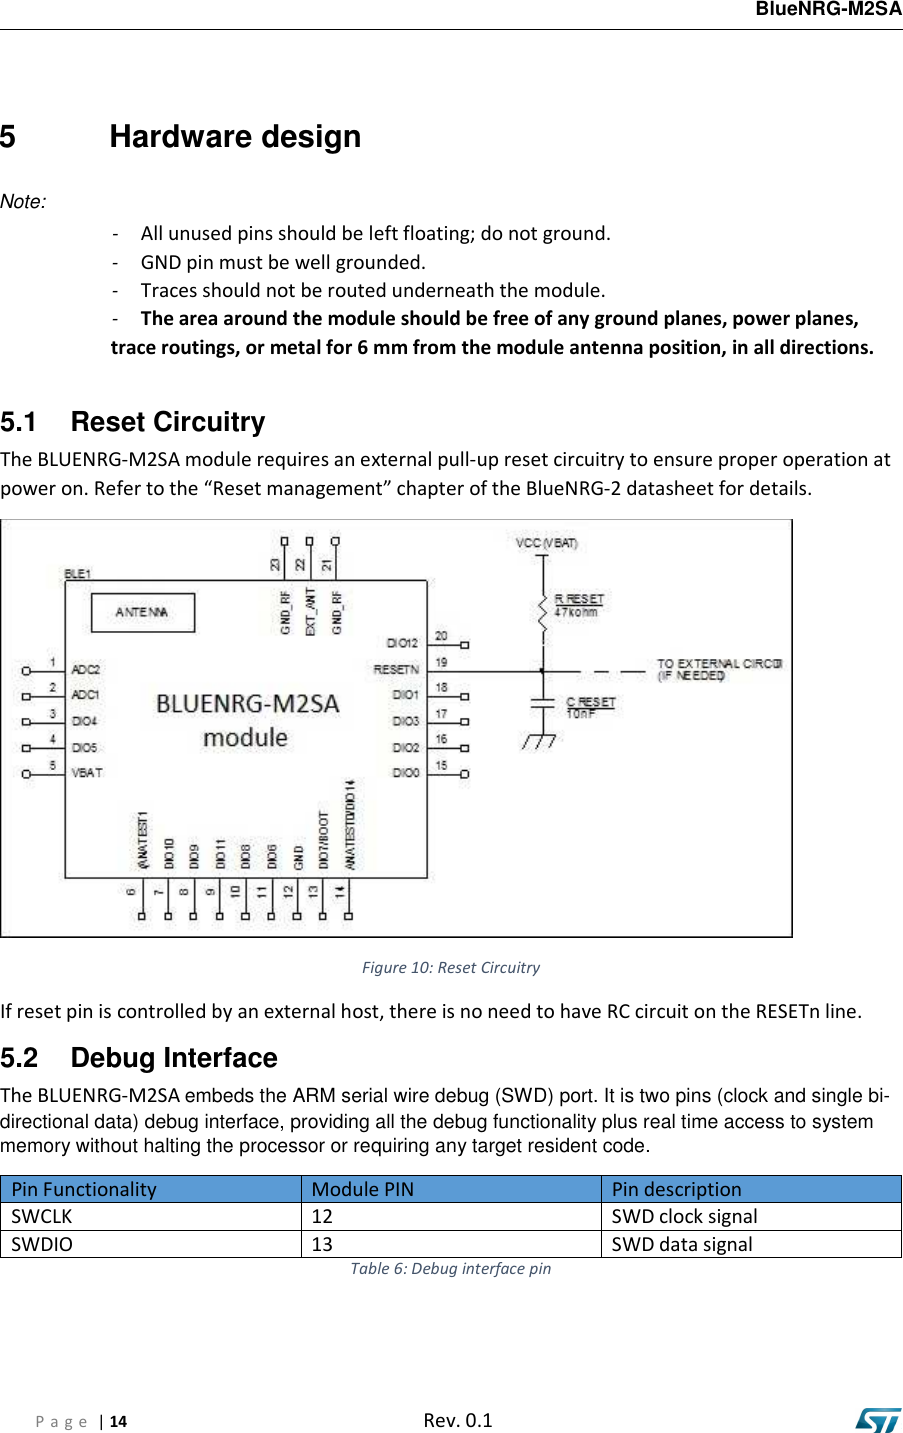 BlueNRG-M2SA P a g e  | 14  Rev. 0.1 5  Hardware design Note: -All unused pins should be left floating; do not ground.-GND pin must be well grounded.-Traces should not be routed underneath the module.-The area around the module should be free of any ground planes, power planes,trace routings, or metal for 6 mm from the module antenna position, in all directions. 5.1  Reset Circuitry The BLUENRG-M2SA module requires an external pull-up reset circuitry to ensure proper operation at power on. Refer to the “Reset management” chapter of the BlueNRG-2 datasheet for details. Figure 10: Reset Circuitry If reset pin is controlled by an external host, there is no need to have RC circuit on the RESETn line. 5.2  Debug Interface The BLUENRG-M2SA embeds the ARM serial wire debug (SWD) port. It is two pins (clock and single bi-directional data) debug interface, providing all the debug functionality plus real time access to system memory without halting the processor or requiring any target resident code. Pin Functionality  Module PIN  Pin description SWCLK  12  SWD clock signal SWDIO  13  SWD data signal Table 6: Debug interface pin 